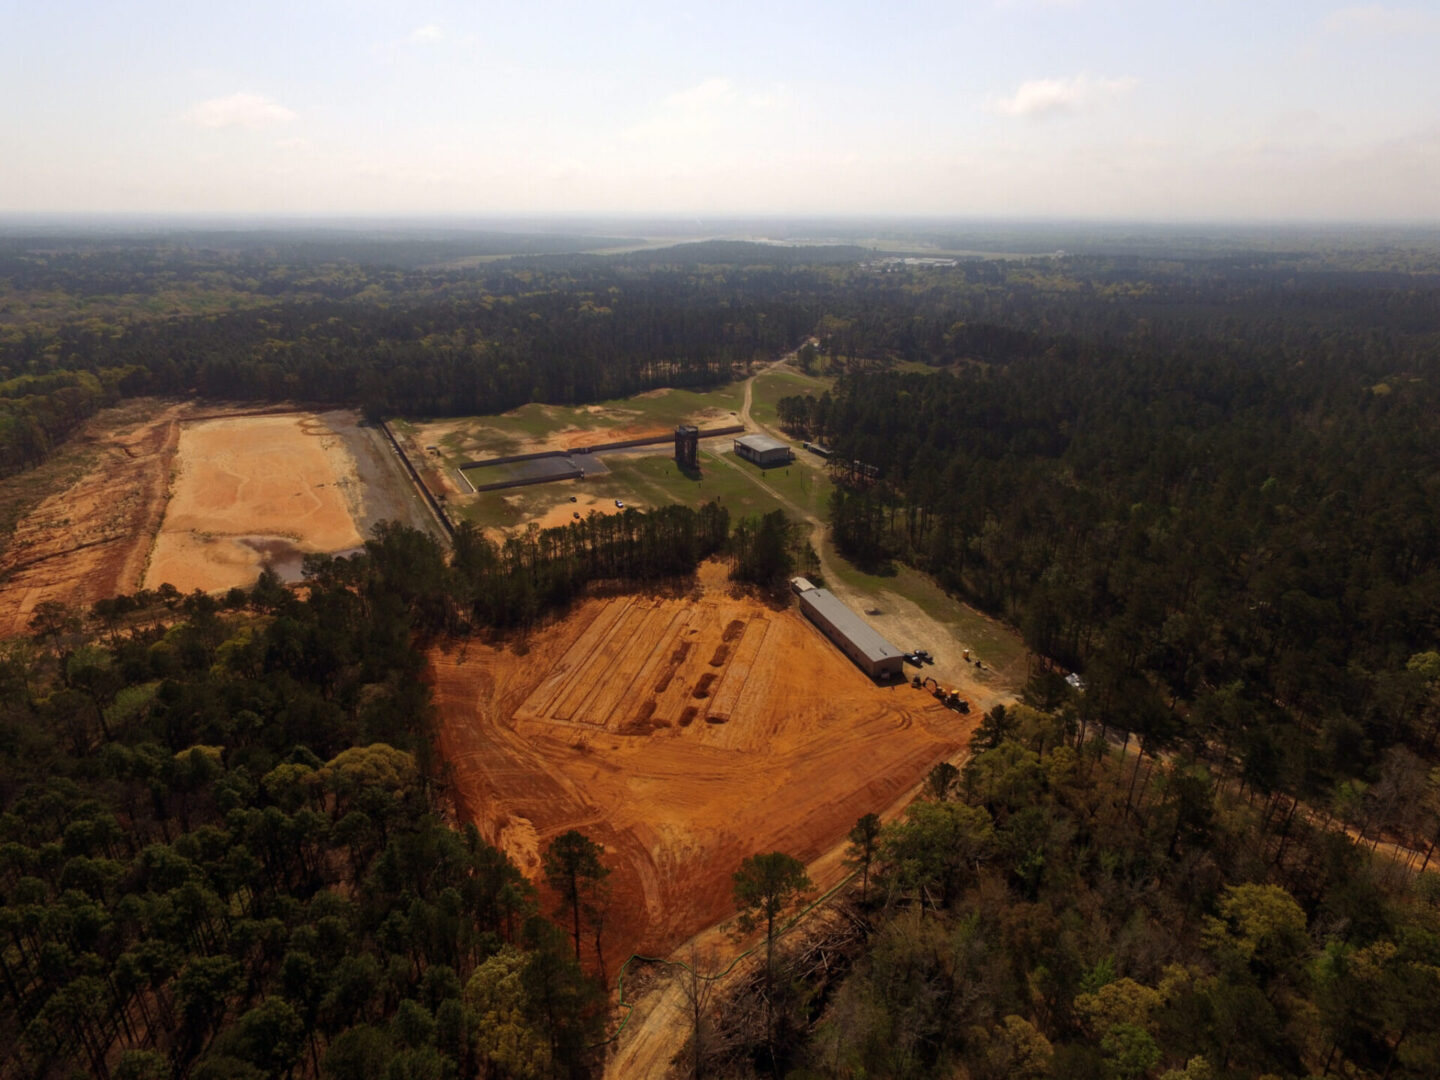 Aerial view of a large construction site with cleared land surrounded by a forest.